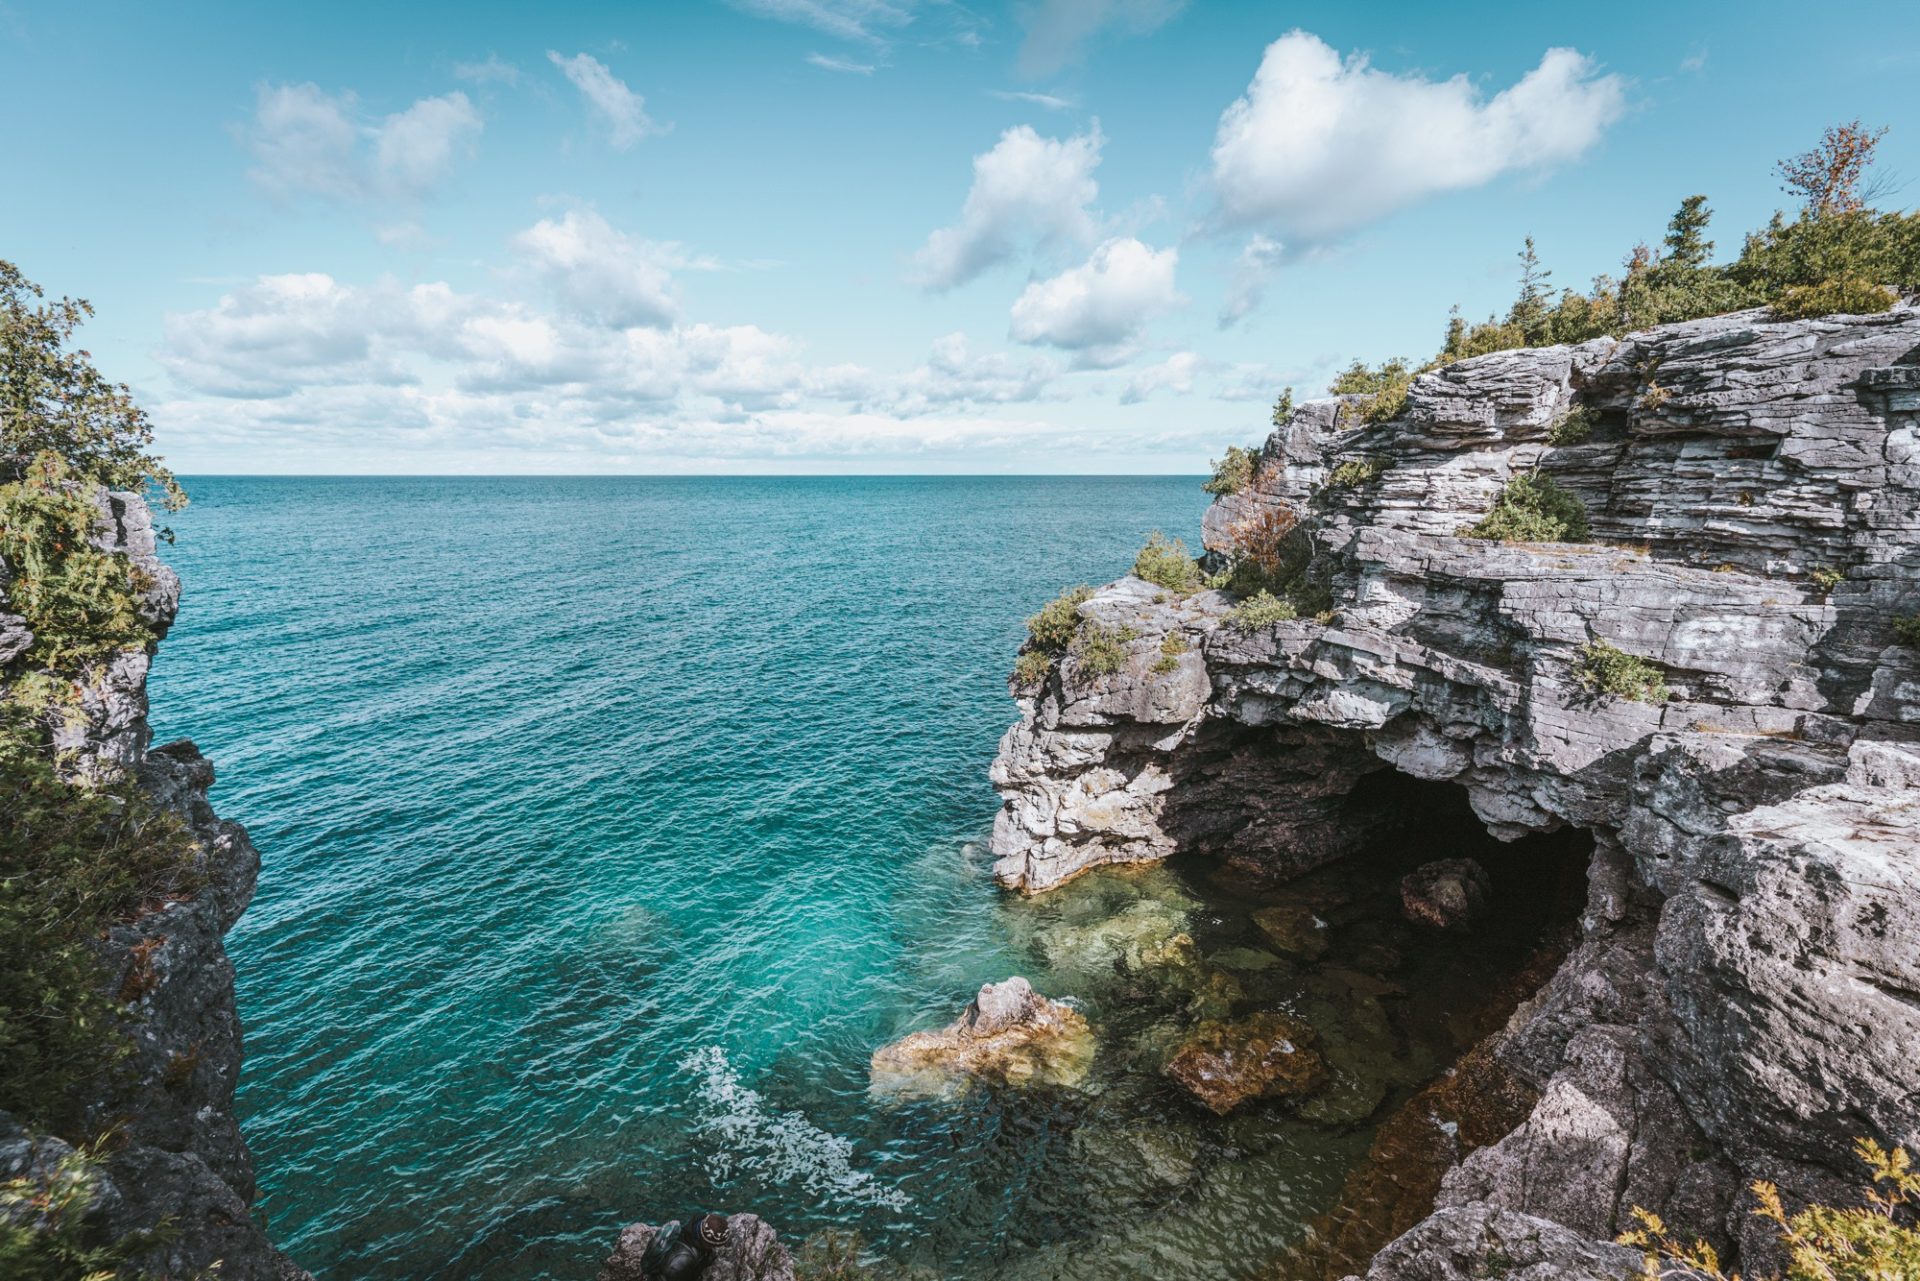 Visiting Bruce Peninsula National Park & the Grotto in Tobermory, Ontario